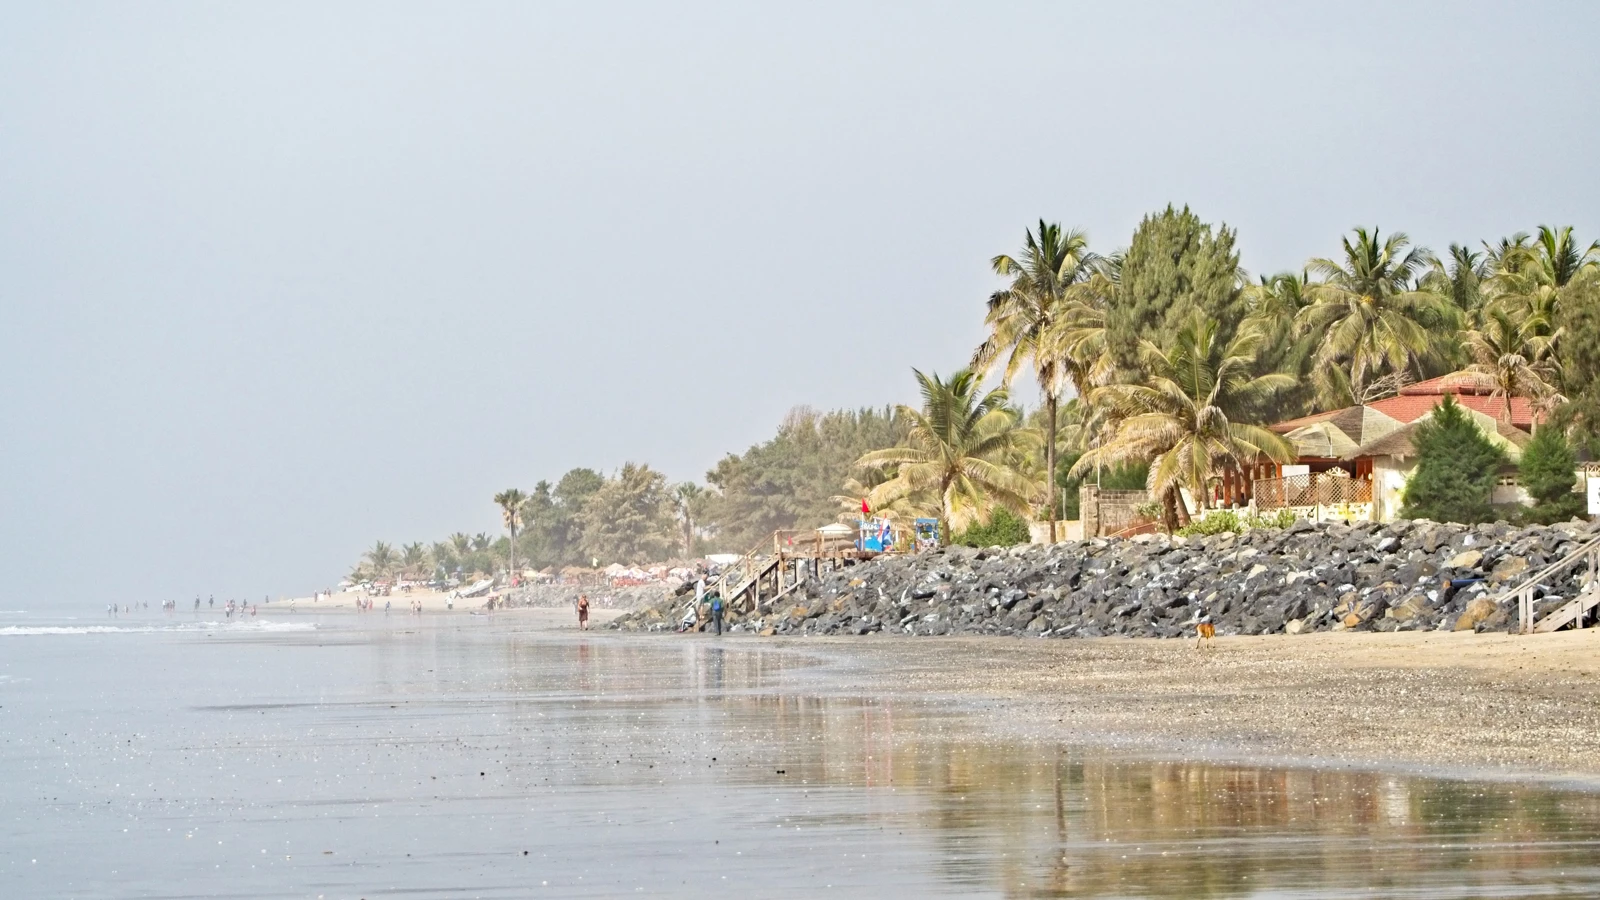 A view along the coastline of The Gambia littered with palm trees on a cloudy day